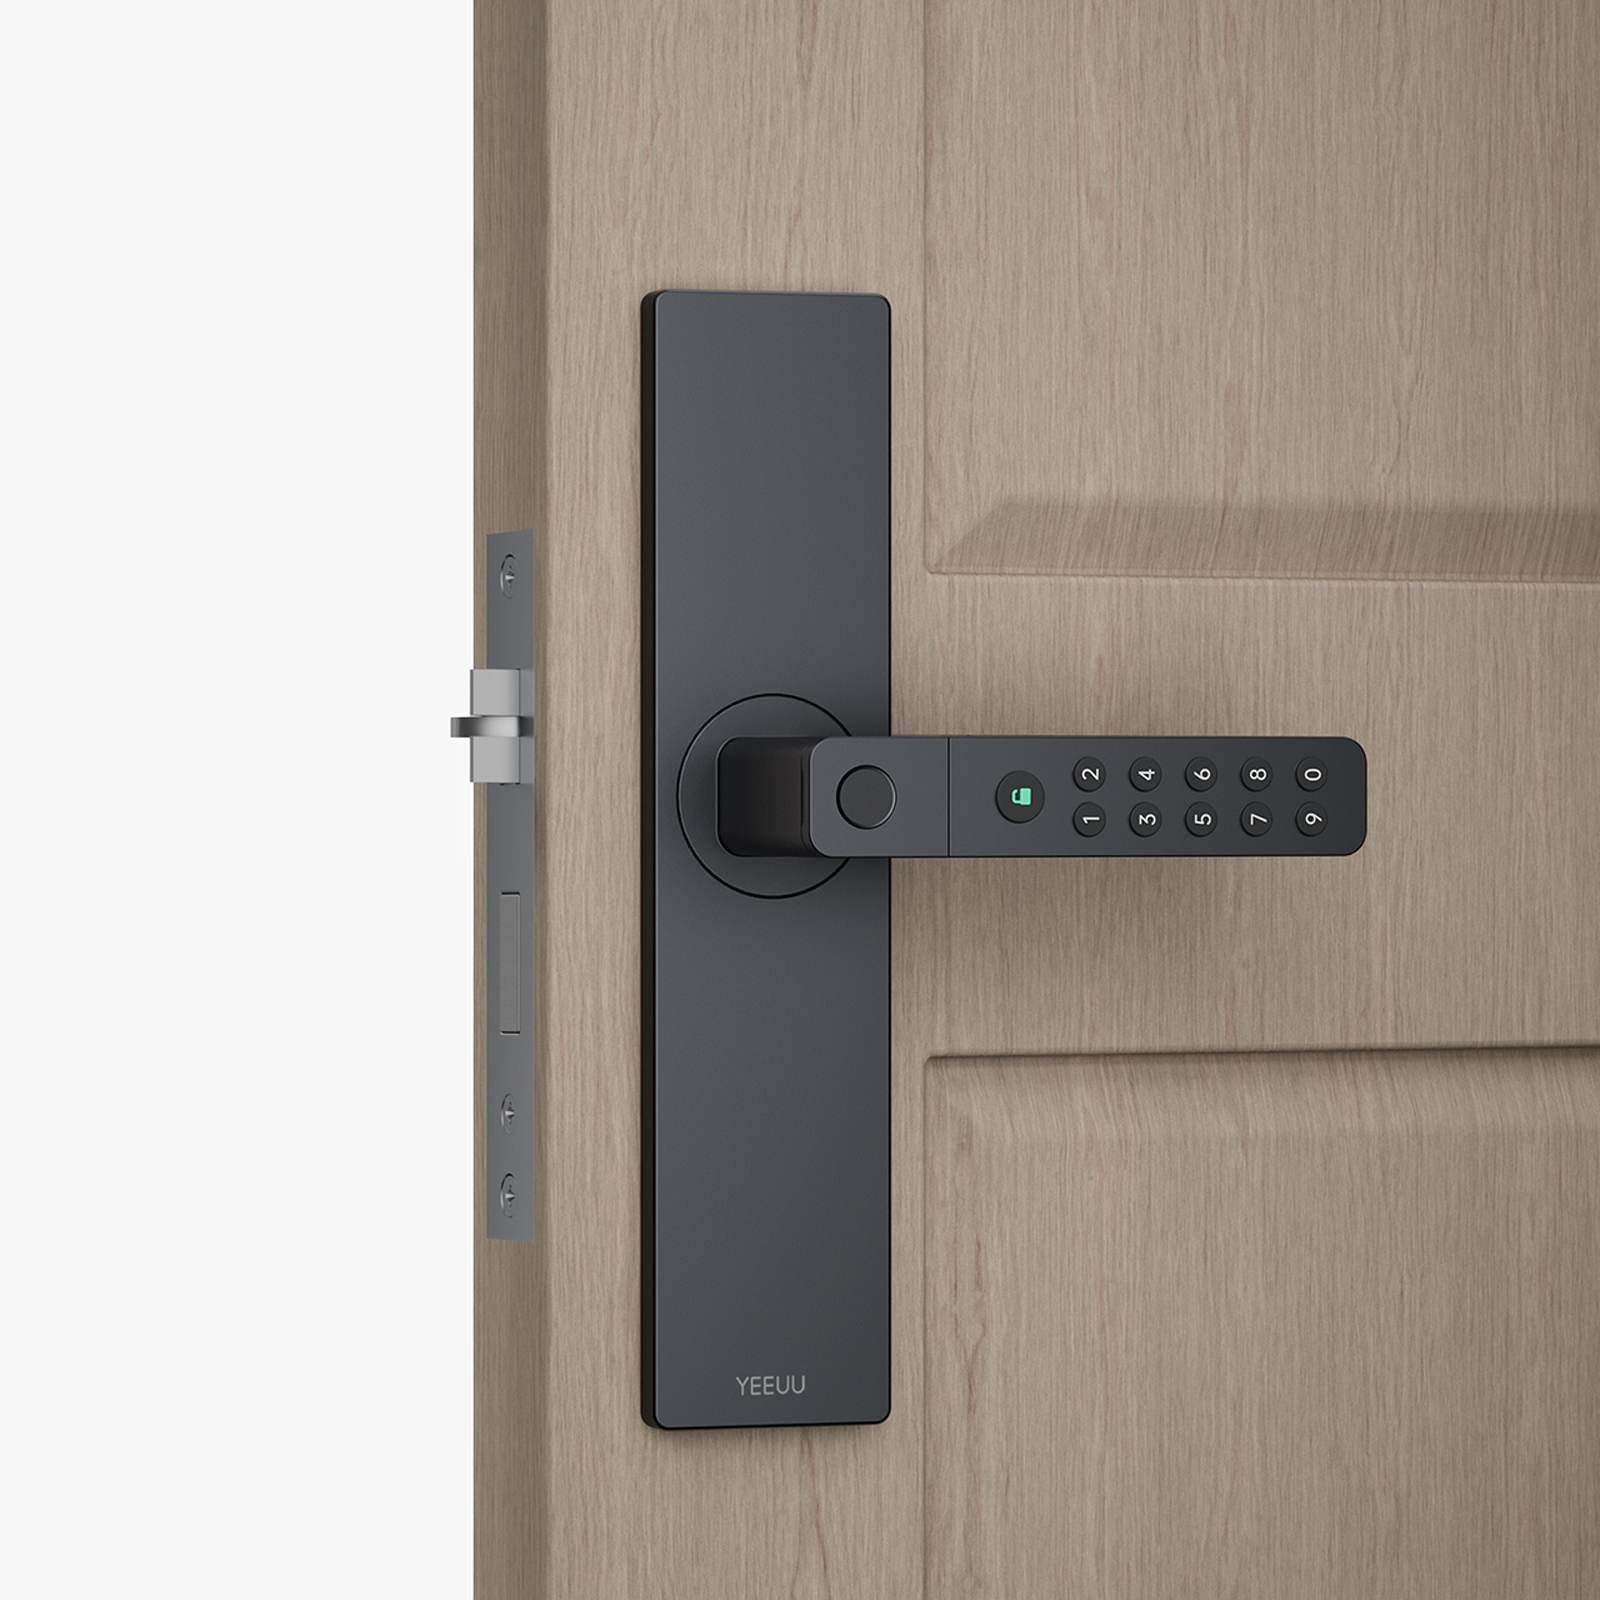 YEEUU B2P2 Smart Mortise Lock, Adapted Various Lock Cases, App-enabled, with Fingerprint, NFC, and Passcode. ANSI Cylinder Inside. (Coming in April)